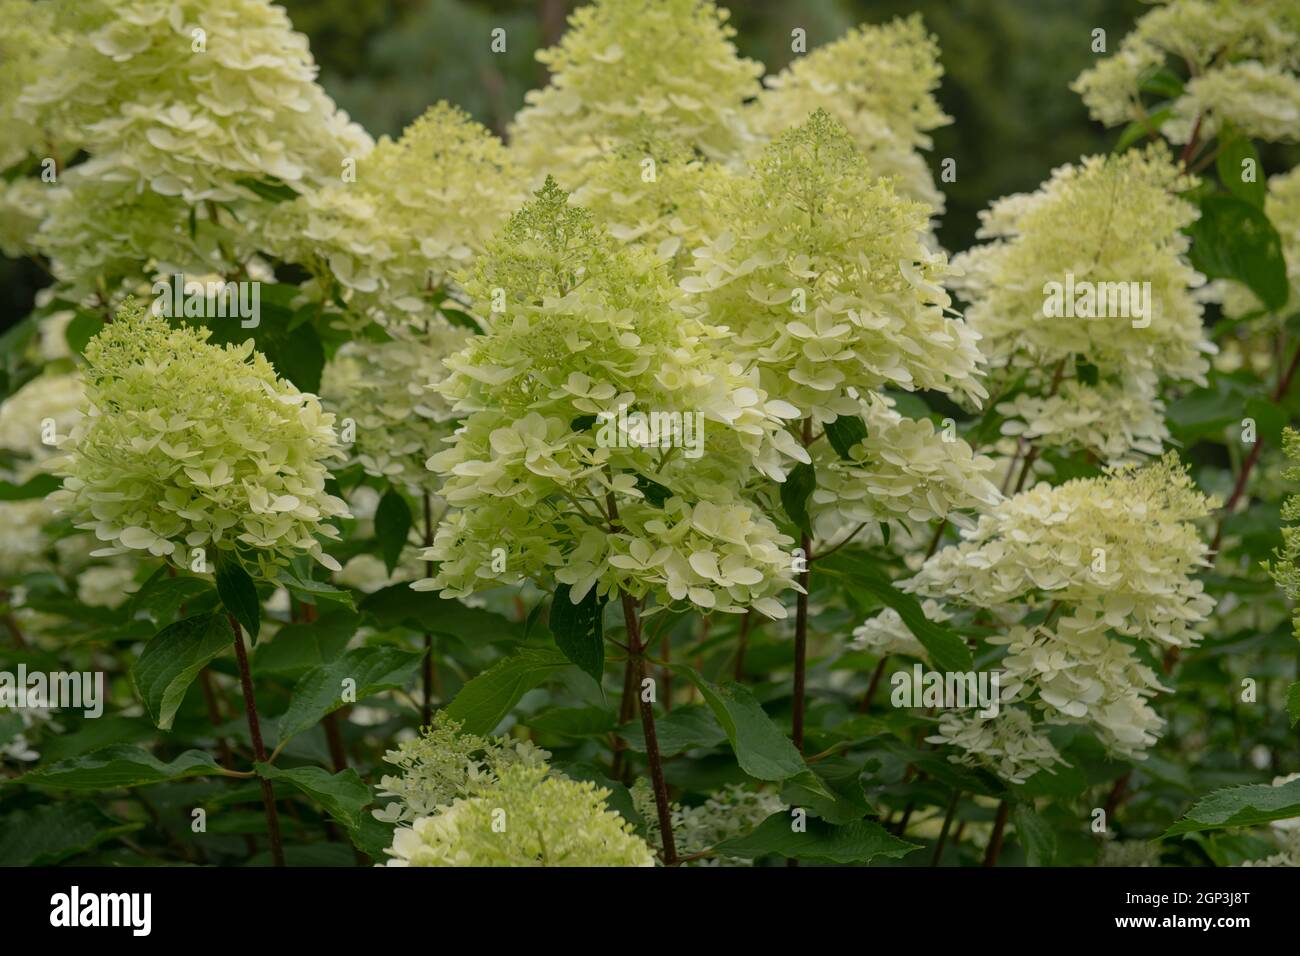 Summer Flowering Creamy White Flower Heads on a Paniculate Hydrangea  Shrub (Hydrangea paniculata 'White Moth') Growing in a Herbaceous Border Stock Photo